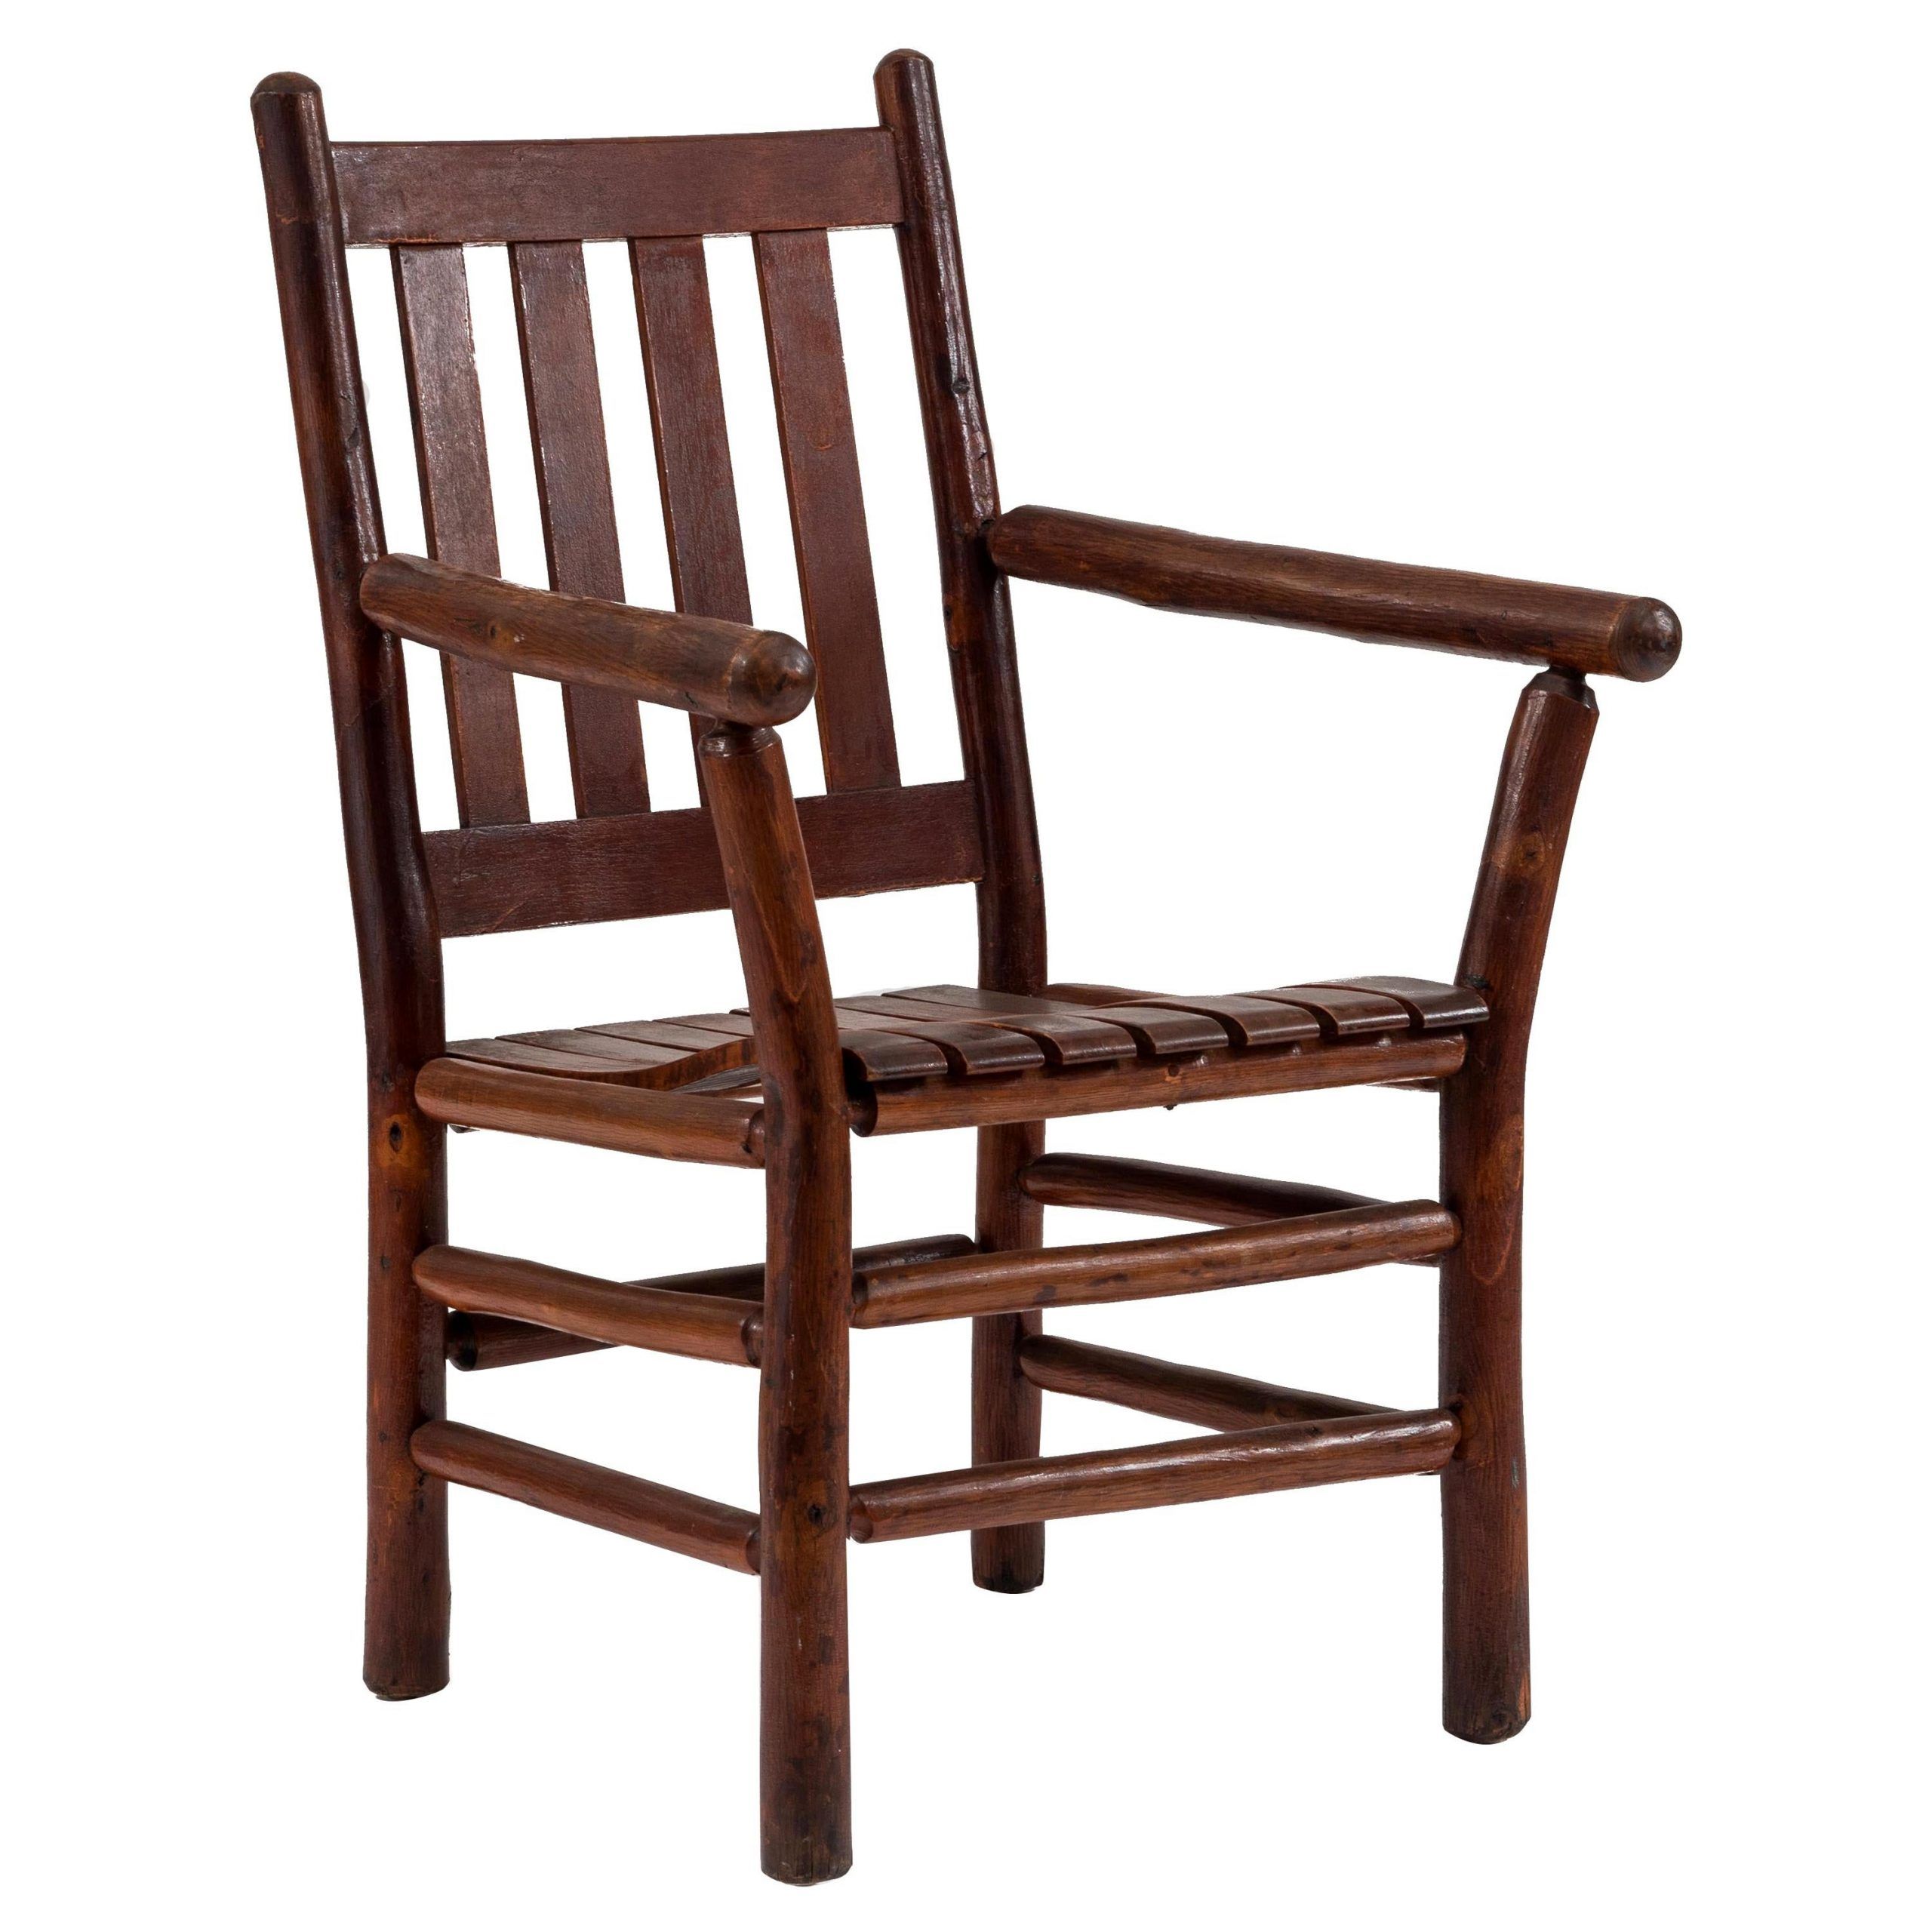 American Rustic Armchaircolumbus Hickory Furniture Co (View 11 of 15)